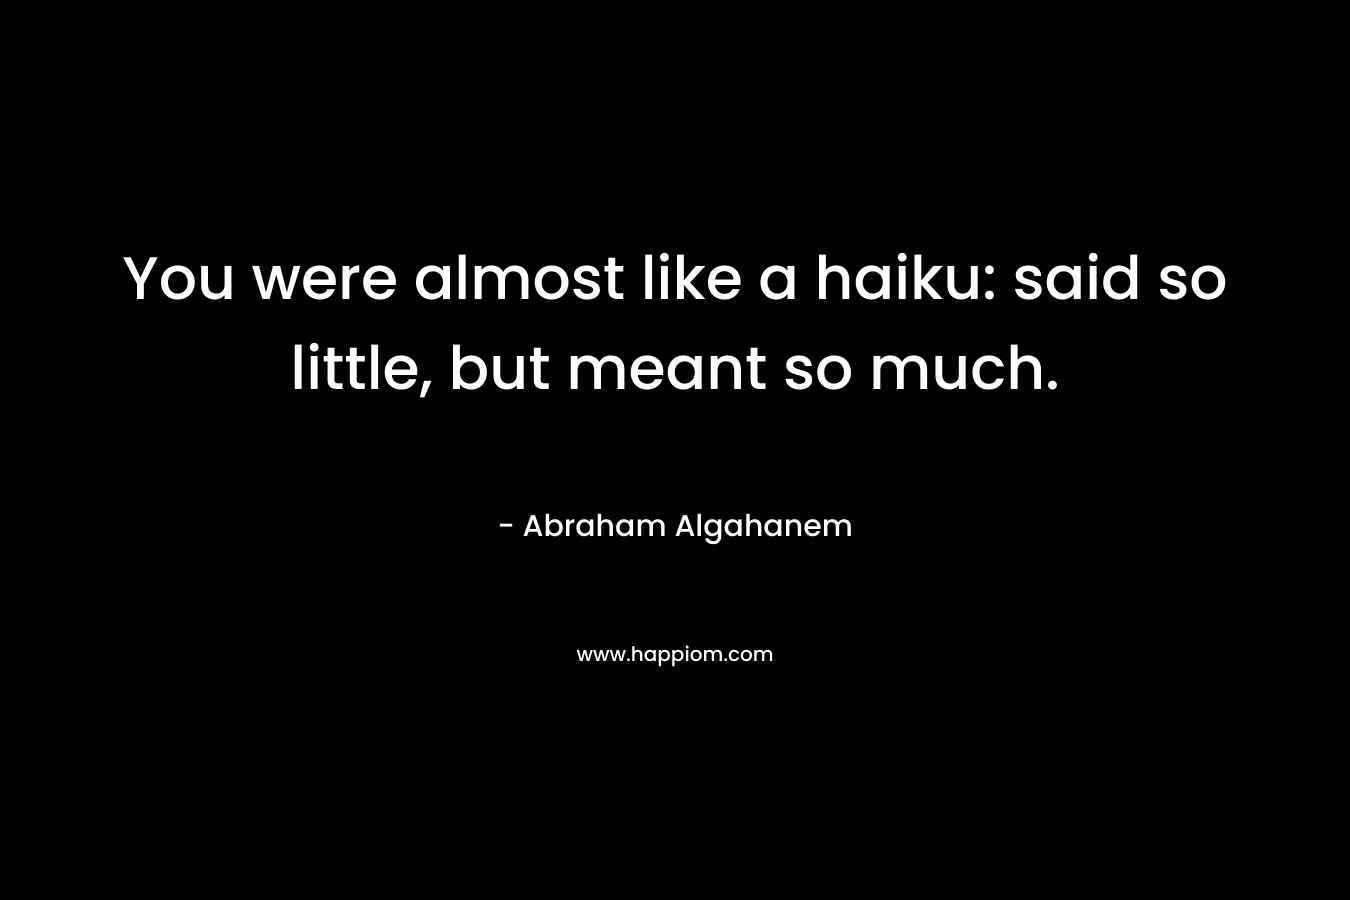 You were almost like a haiku: said so little, but meant so much.